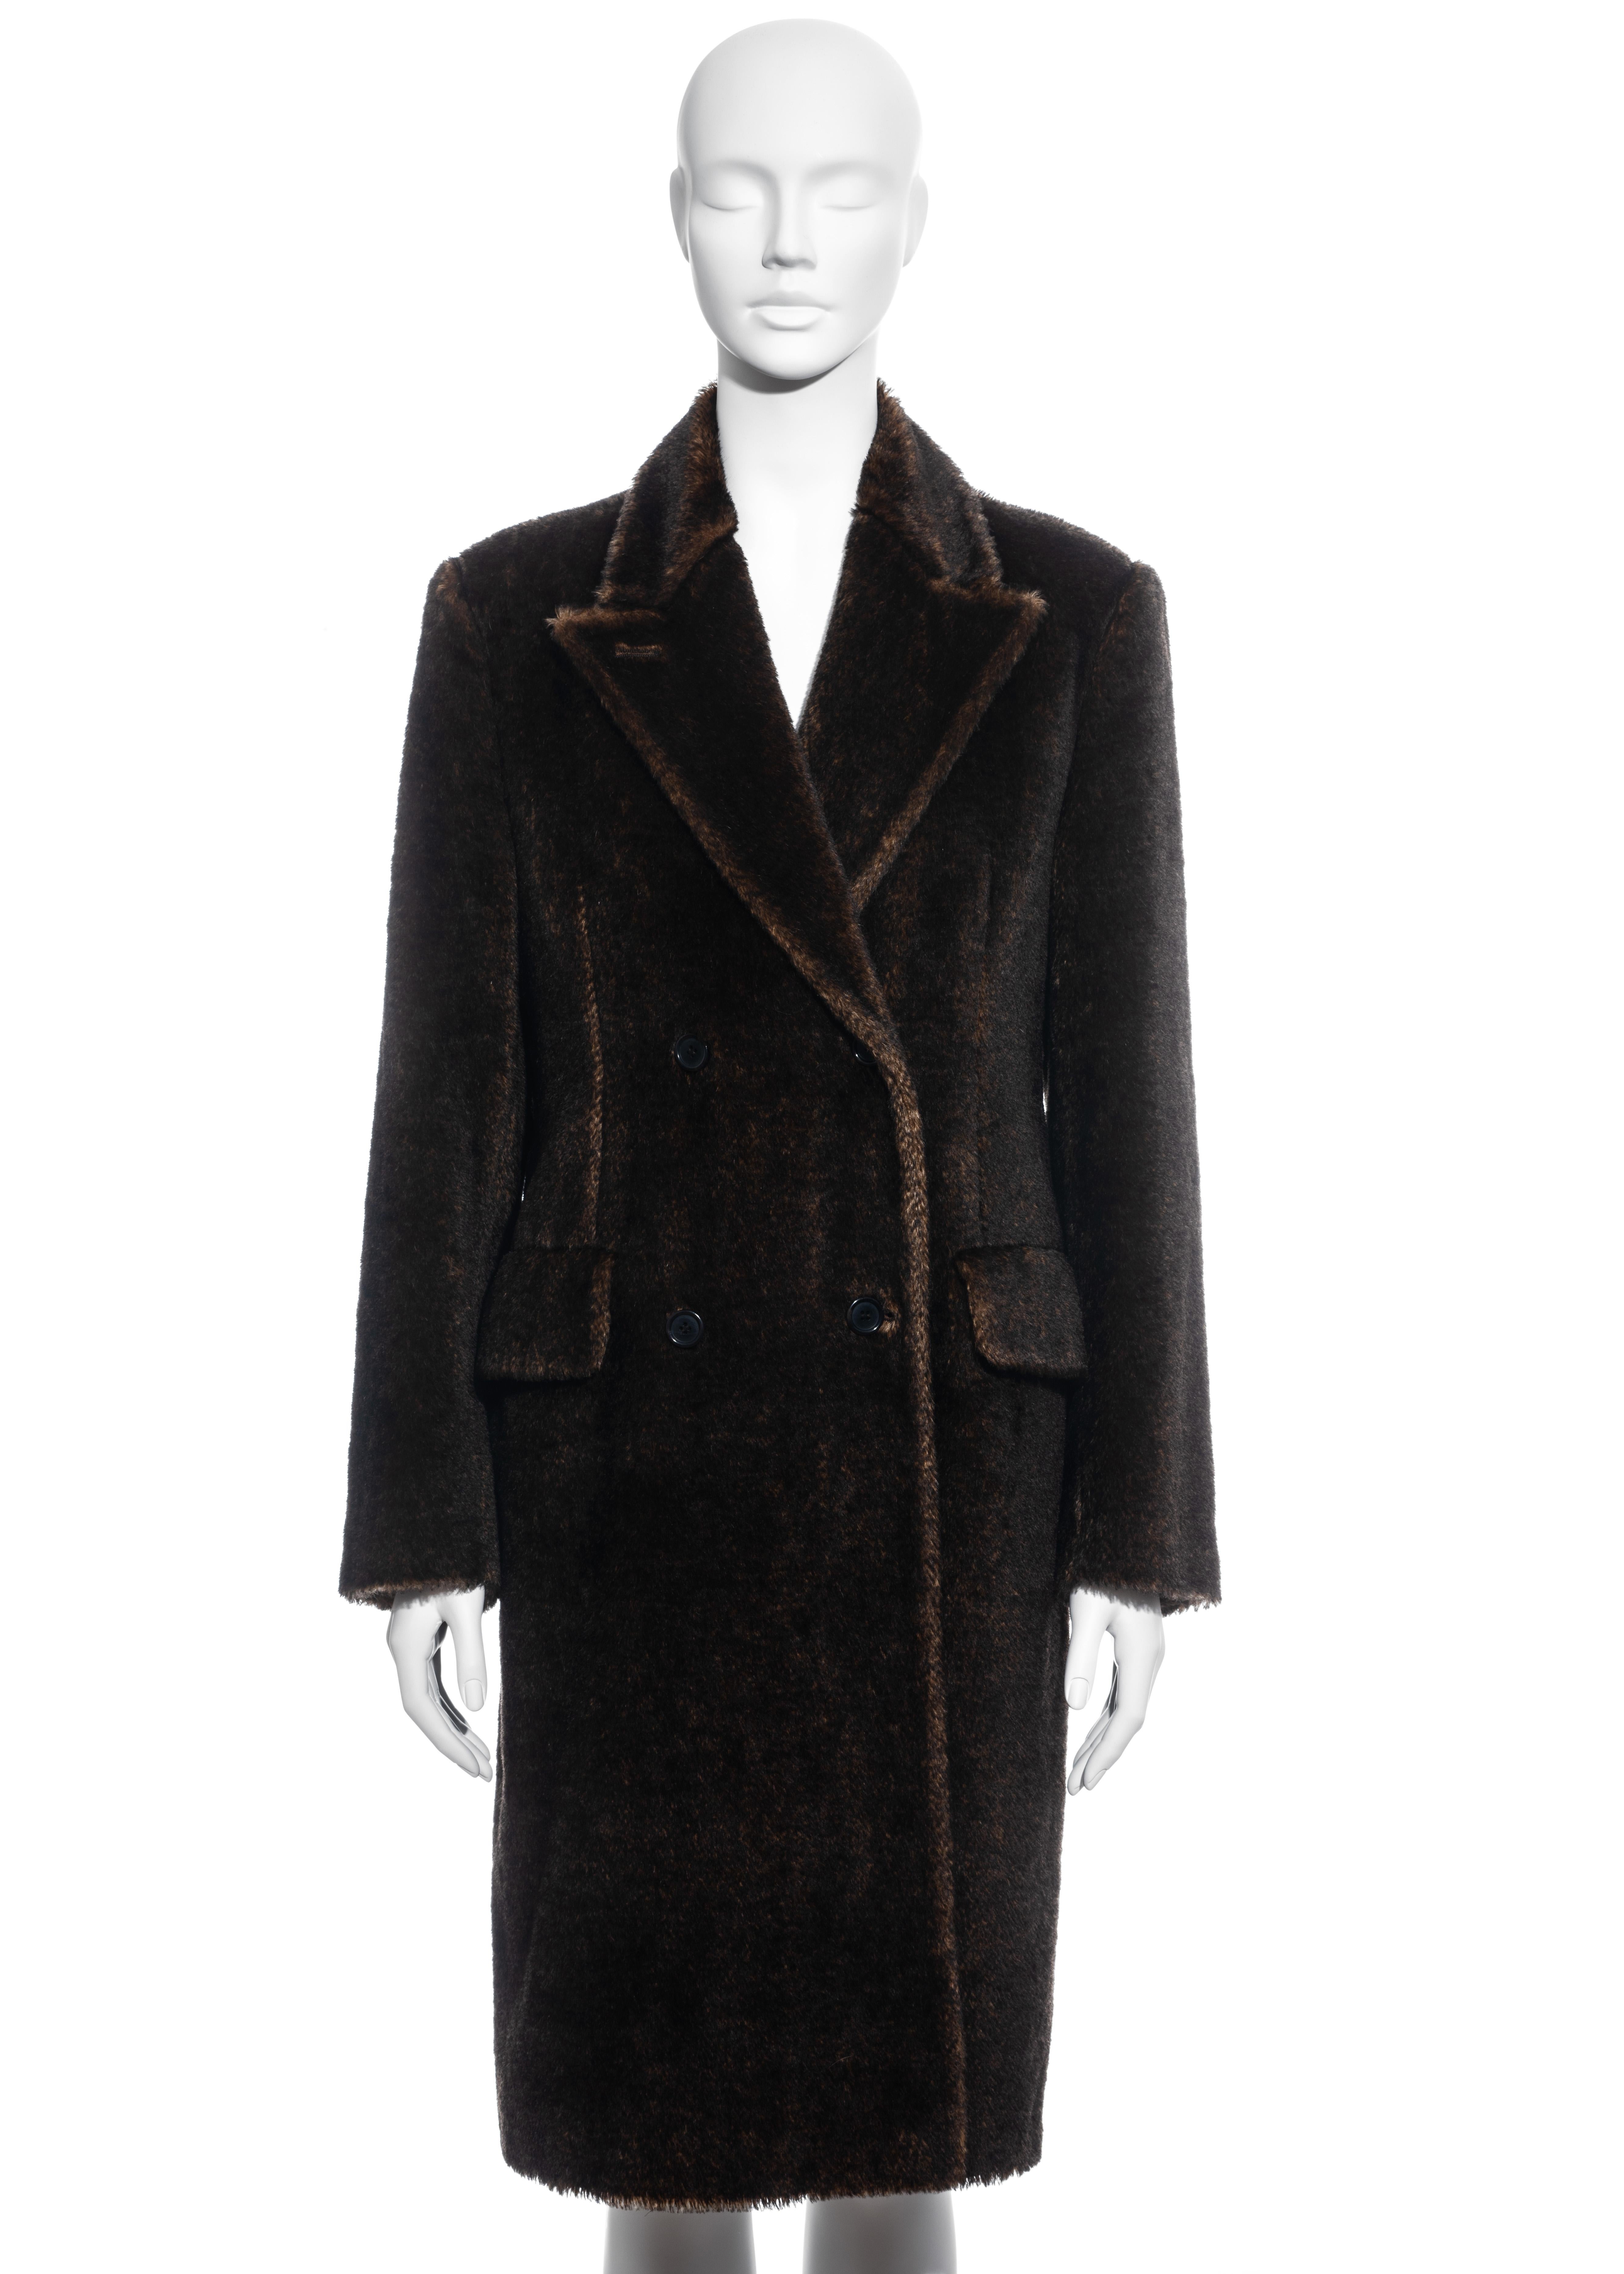 ▪ Brown mohair double-breasted coat
▪ Peak lapel
▪ Two front flap pockets
▪ IT 46 - FR 42 - UK 14 - US 10
▪ Fall-Winter 1997